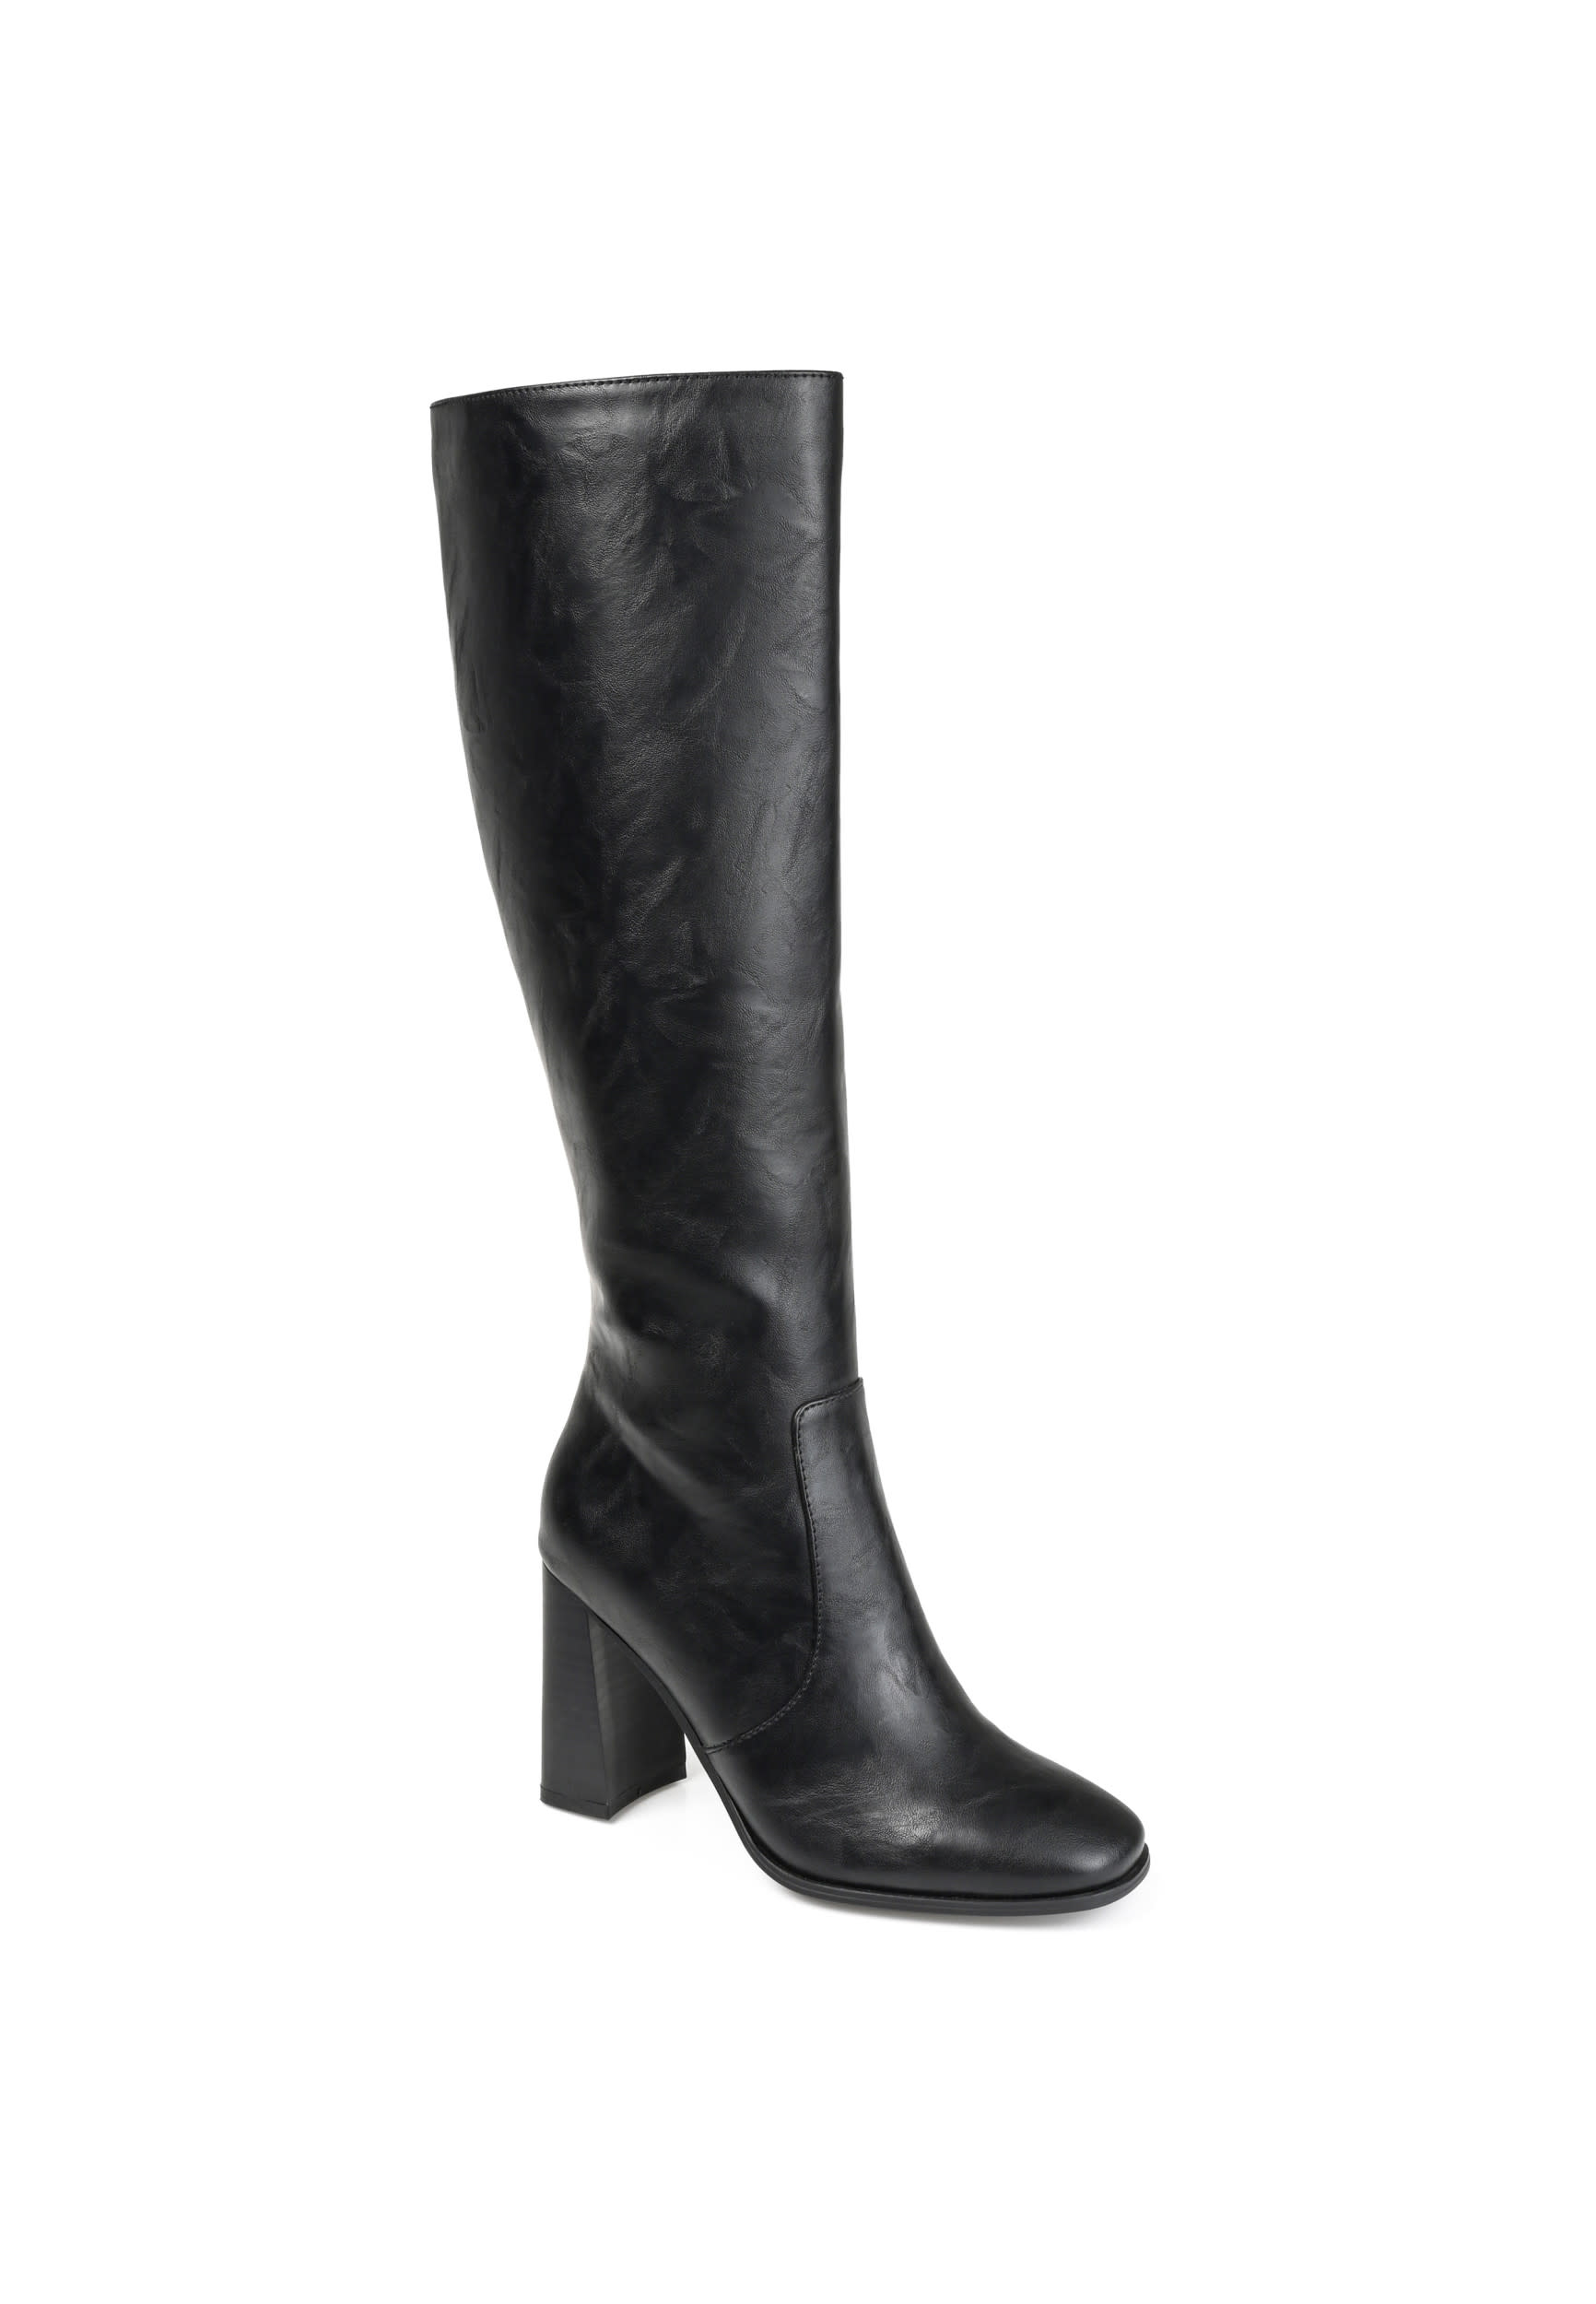 Journee Collection Harley Extra Wide Calf Riding Boot - Free Shipping